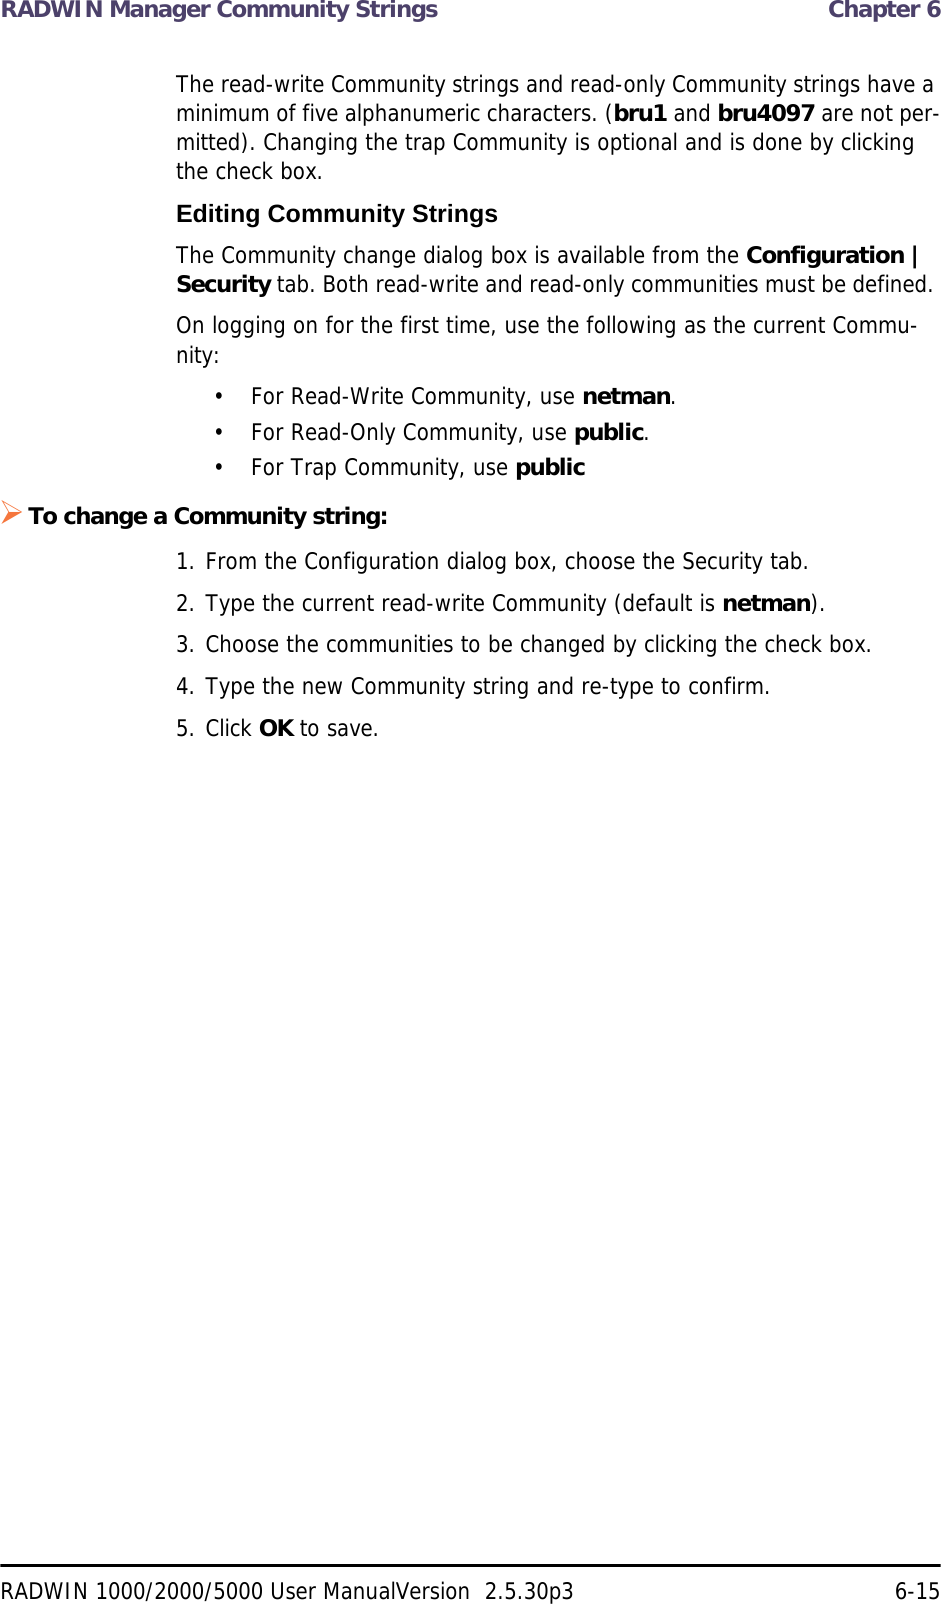 RADWIN Manager Community Strings  Chapter 6RADWIN 1000/2000/5000 User ManualVersion  2.5.30p3 6-15The read-write Community strings and read-only Community strings have a minimum of five alphanumeric characters. (bru1 and bru4097 are not per-mitted). Changing the trap Community is optional and is done by clicking the check box.Editing Community StringsThe Community change dialog box is available from the Configuration | Security tab. Both read-write and read-only communities must be defined. On logging on for the first time, use the following as the current Commu-nity:• For Read-Write Community, use netman. • For Read-Only Community, use public.• For Trap Community, use publicTo change a Community string:1. From the Configuration dialog box, choose the Security tab.2. Type the current read-write Community (default is netman).3. Choose the communities to be changed by clicking the check box.4. Type the new Community string and re-type to confirm.5. Click OK to save.